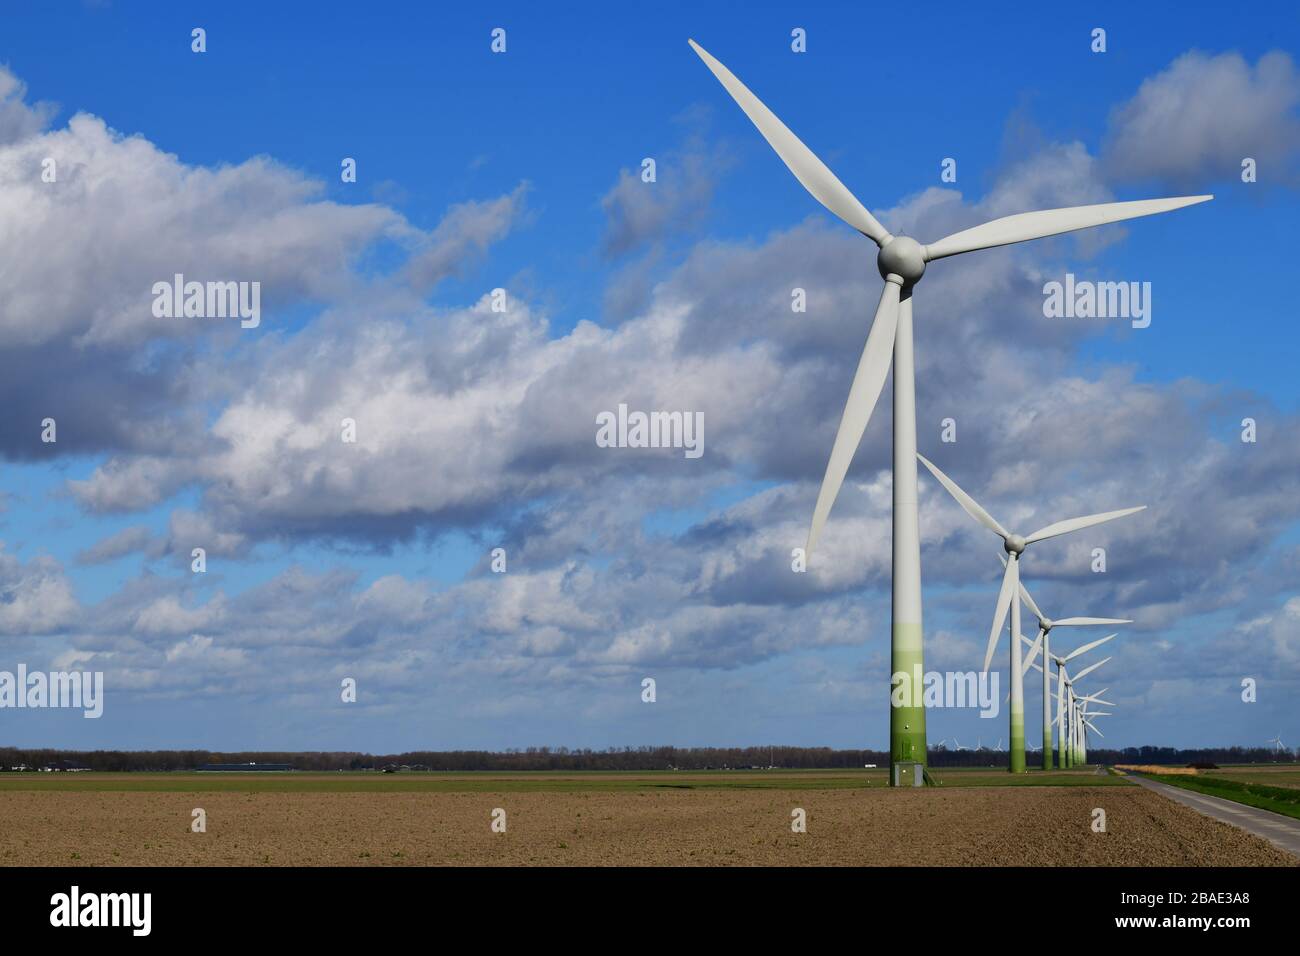 Line of modern windmills in typical Dutch agricultural landscape against blue sky with large white clouds Stock Photo